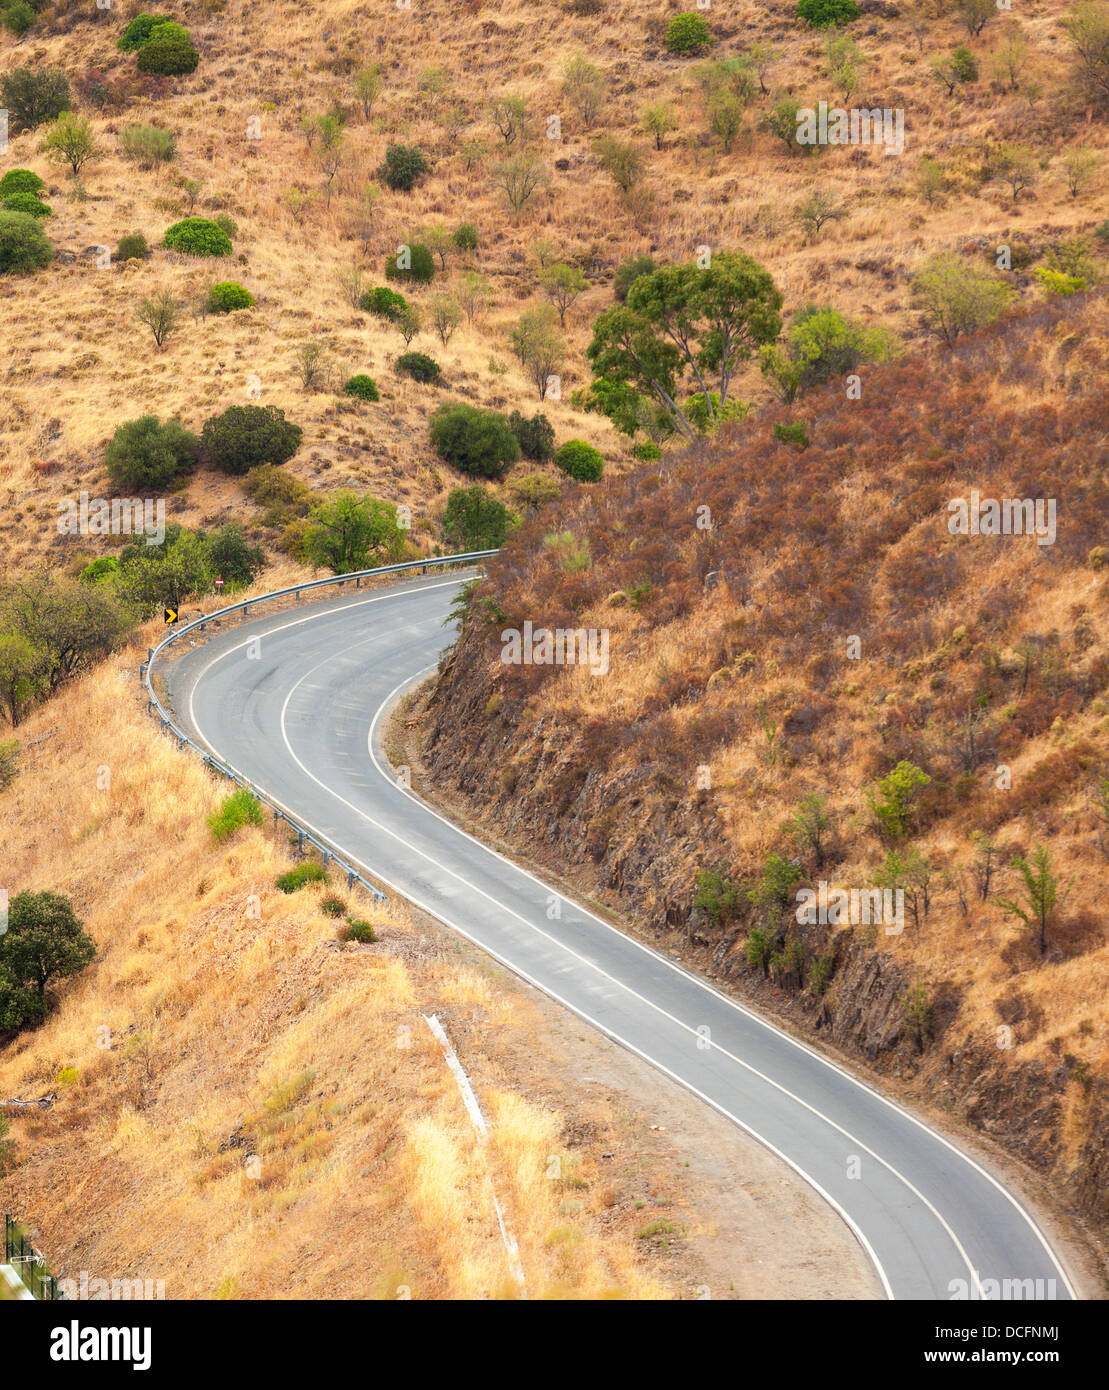 Winding tarred road in the countryside snaking through dry hilly terrain viewed from above Stock Photo